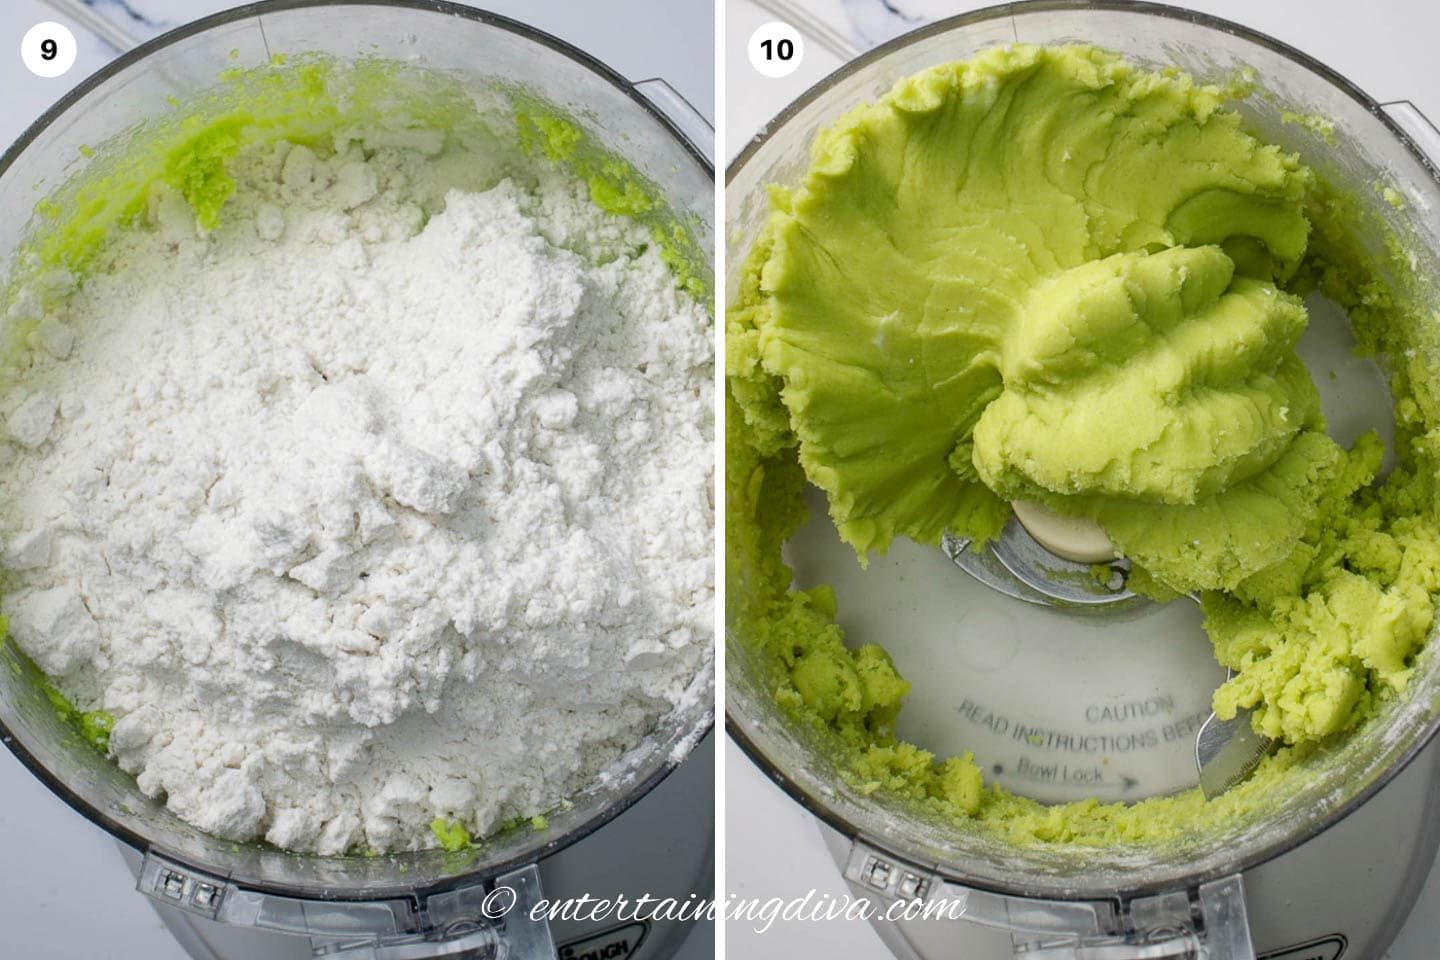 How to blend the flour mixture with the green liquid and butter mixture in a food processor